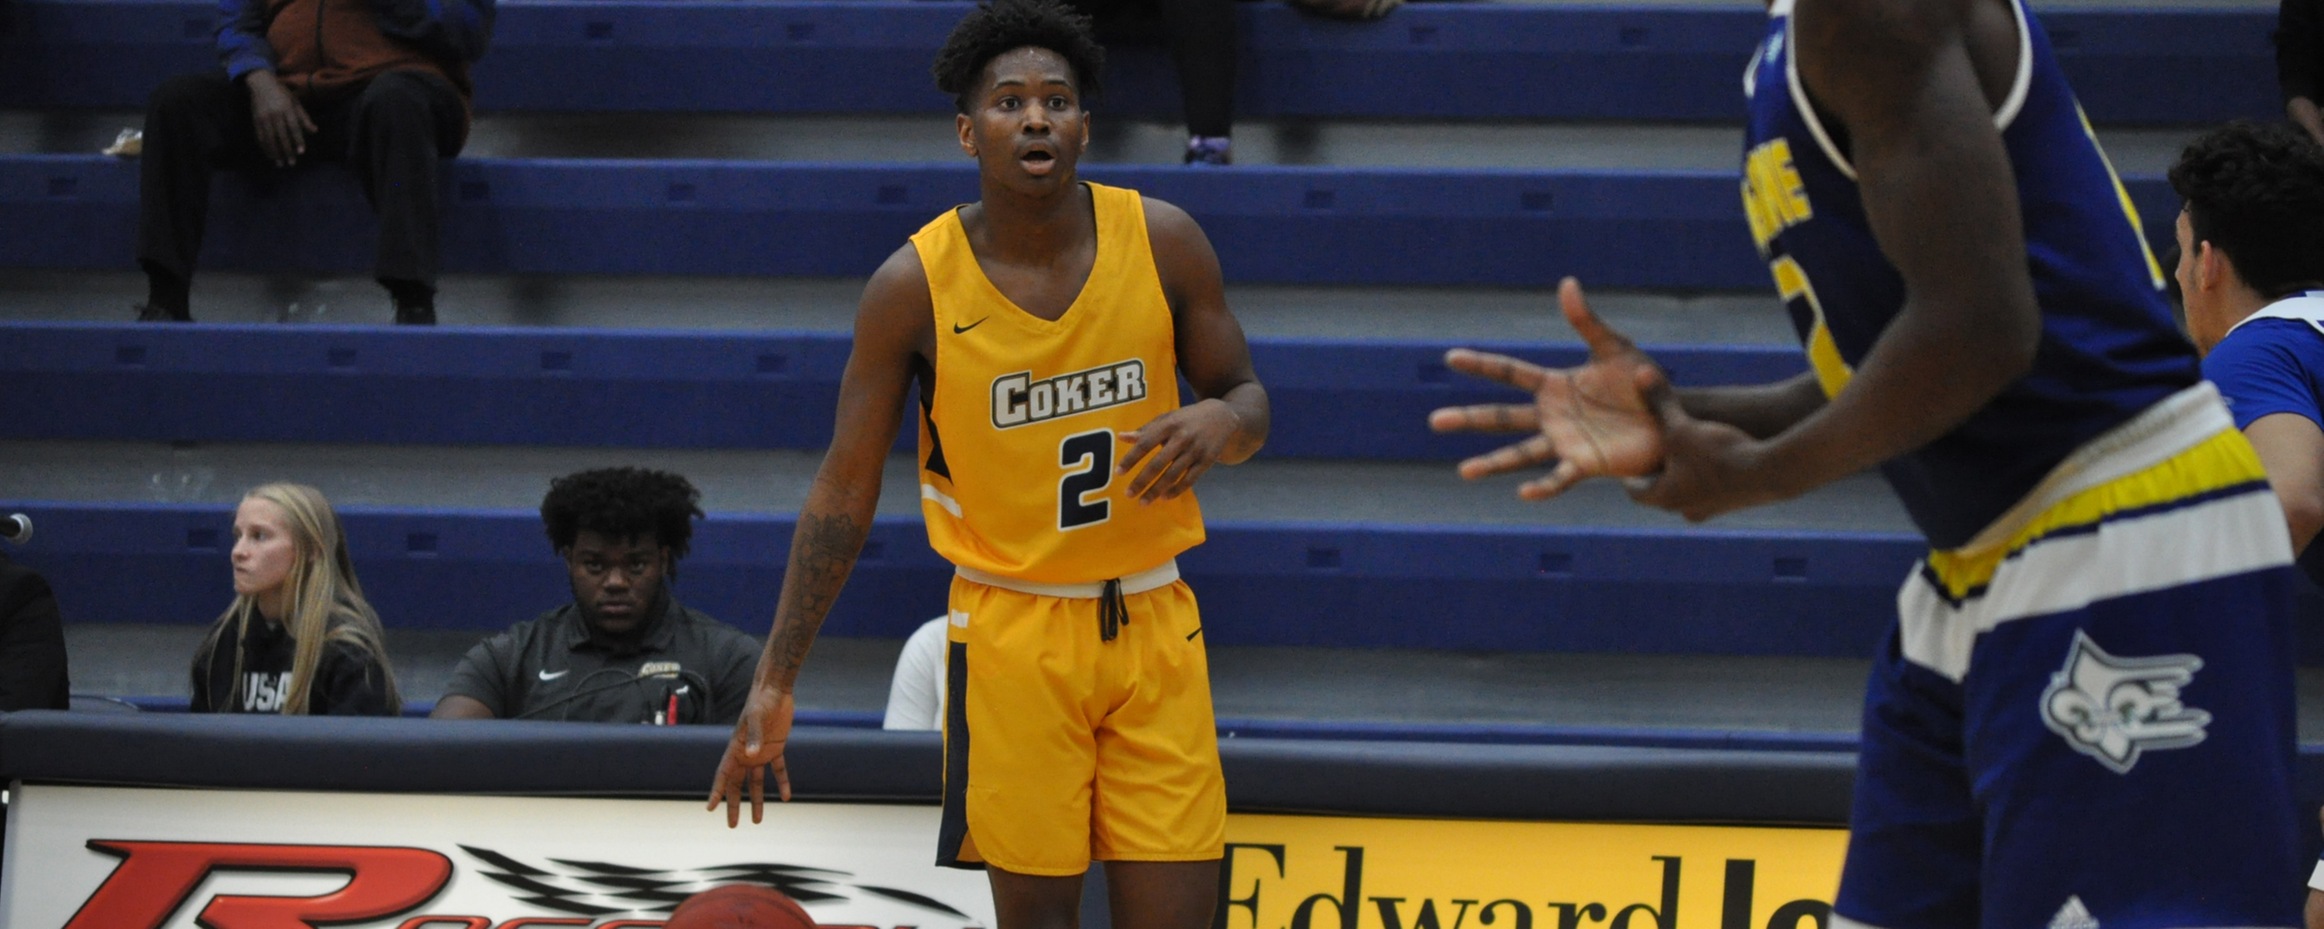 Men's Basketball Falls in Tight Conference Contest to Anderson (S.C.) Wednesday Night